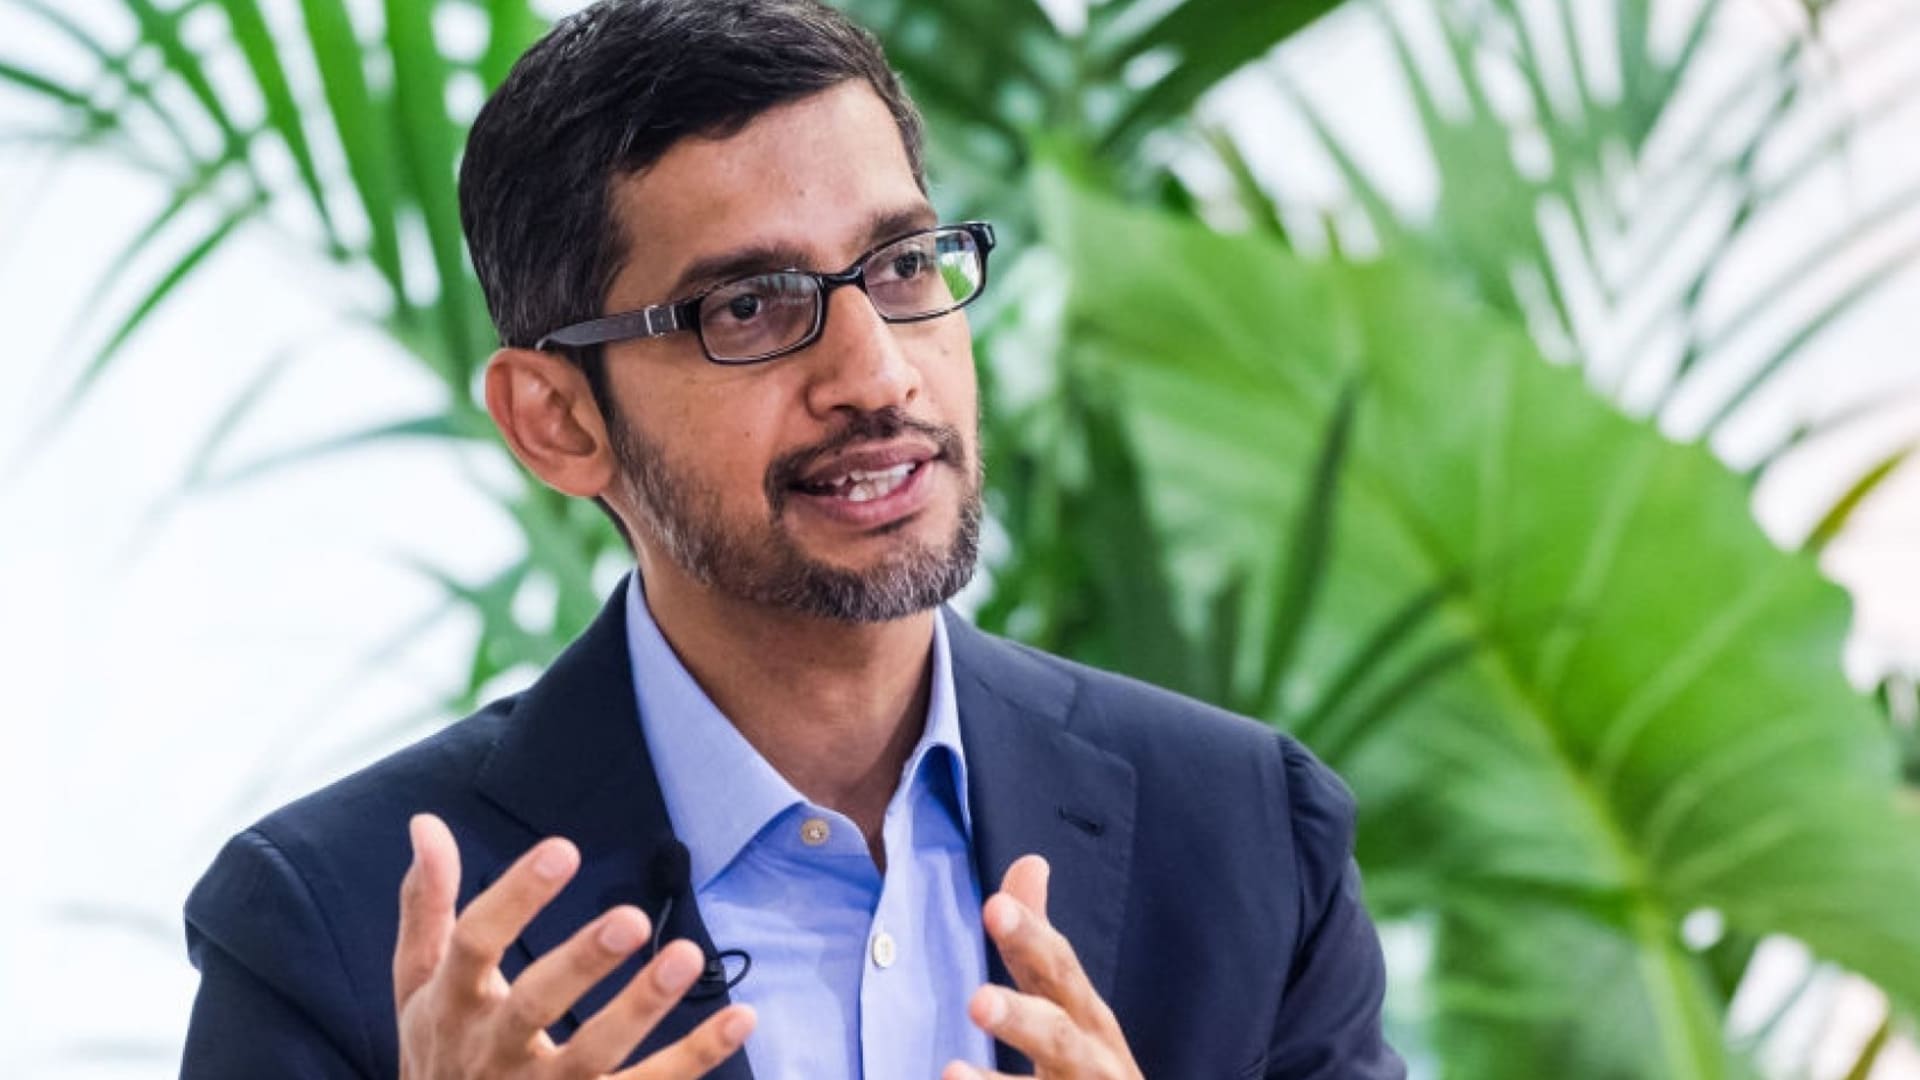 Google's CEO Has a Remarkably Simple Monday Morning Rule That Explains Why He's So Productive